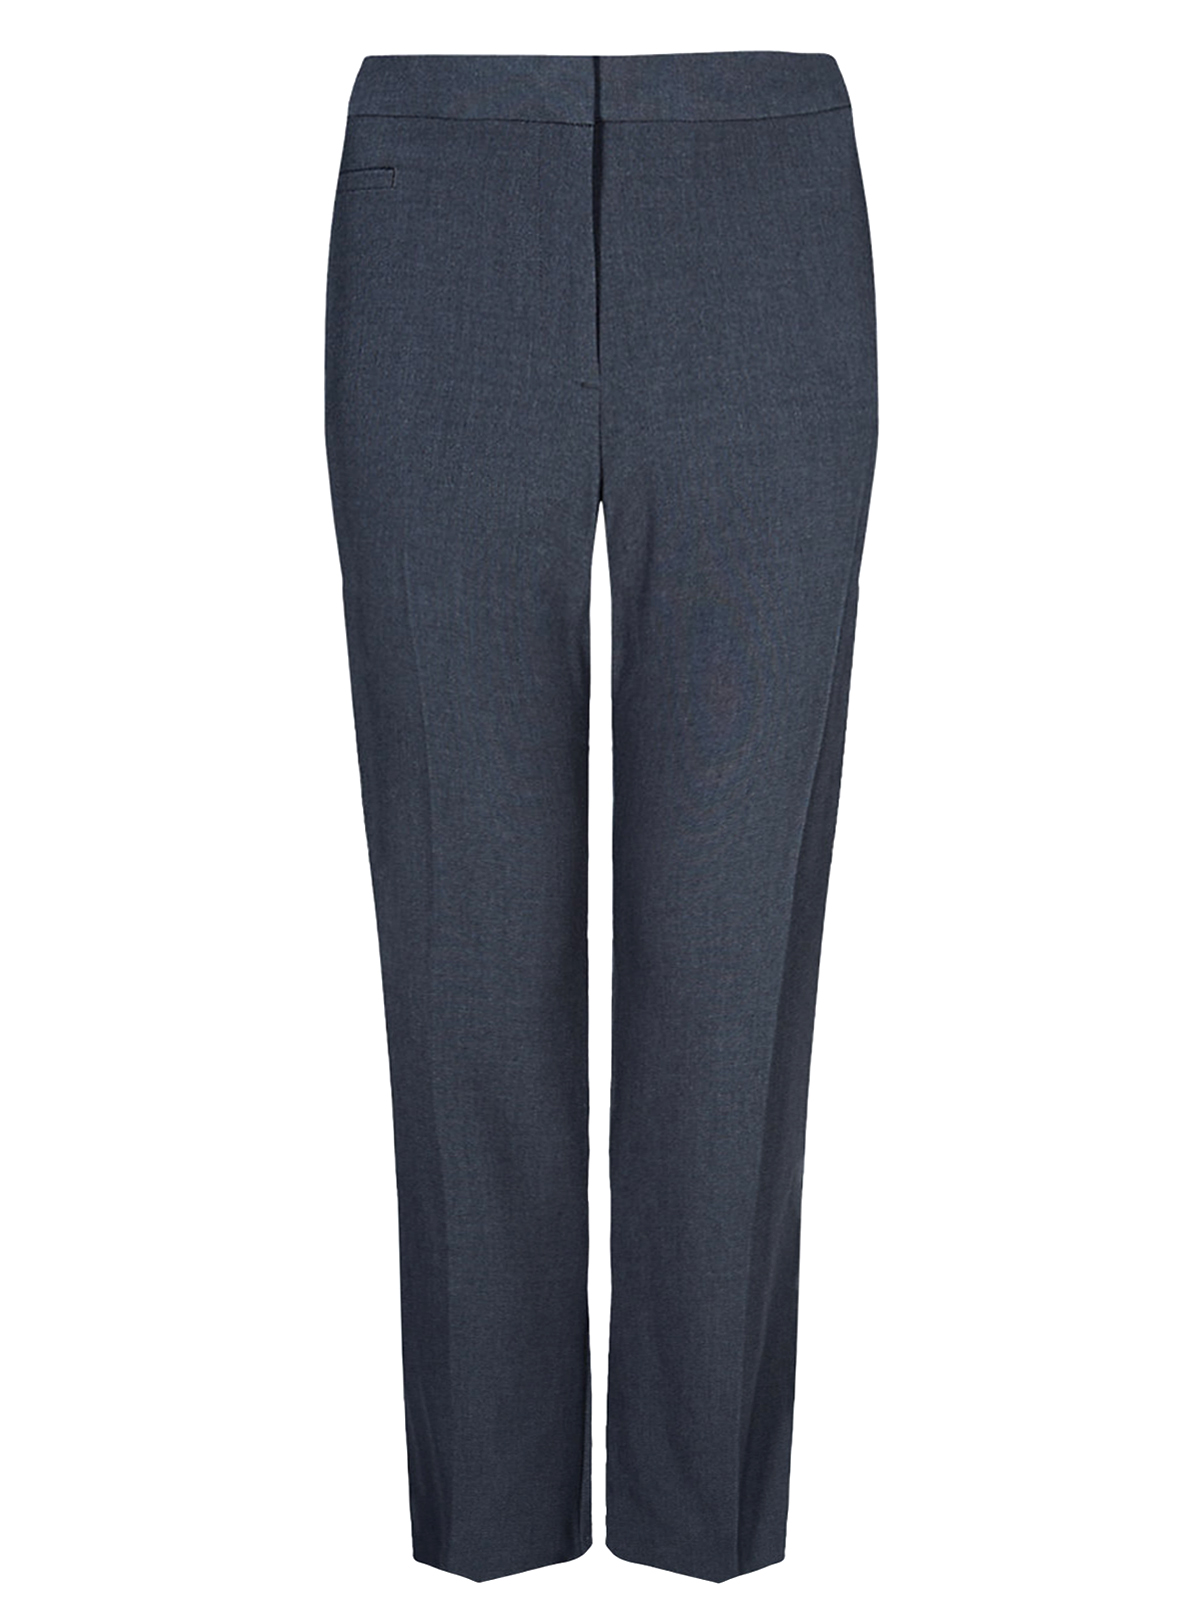 Marks and Spencer - - M&5 CHARCOAL Flat Front Bootleg Trousers - Size ...